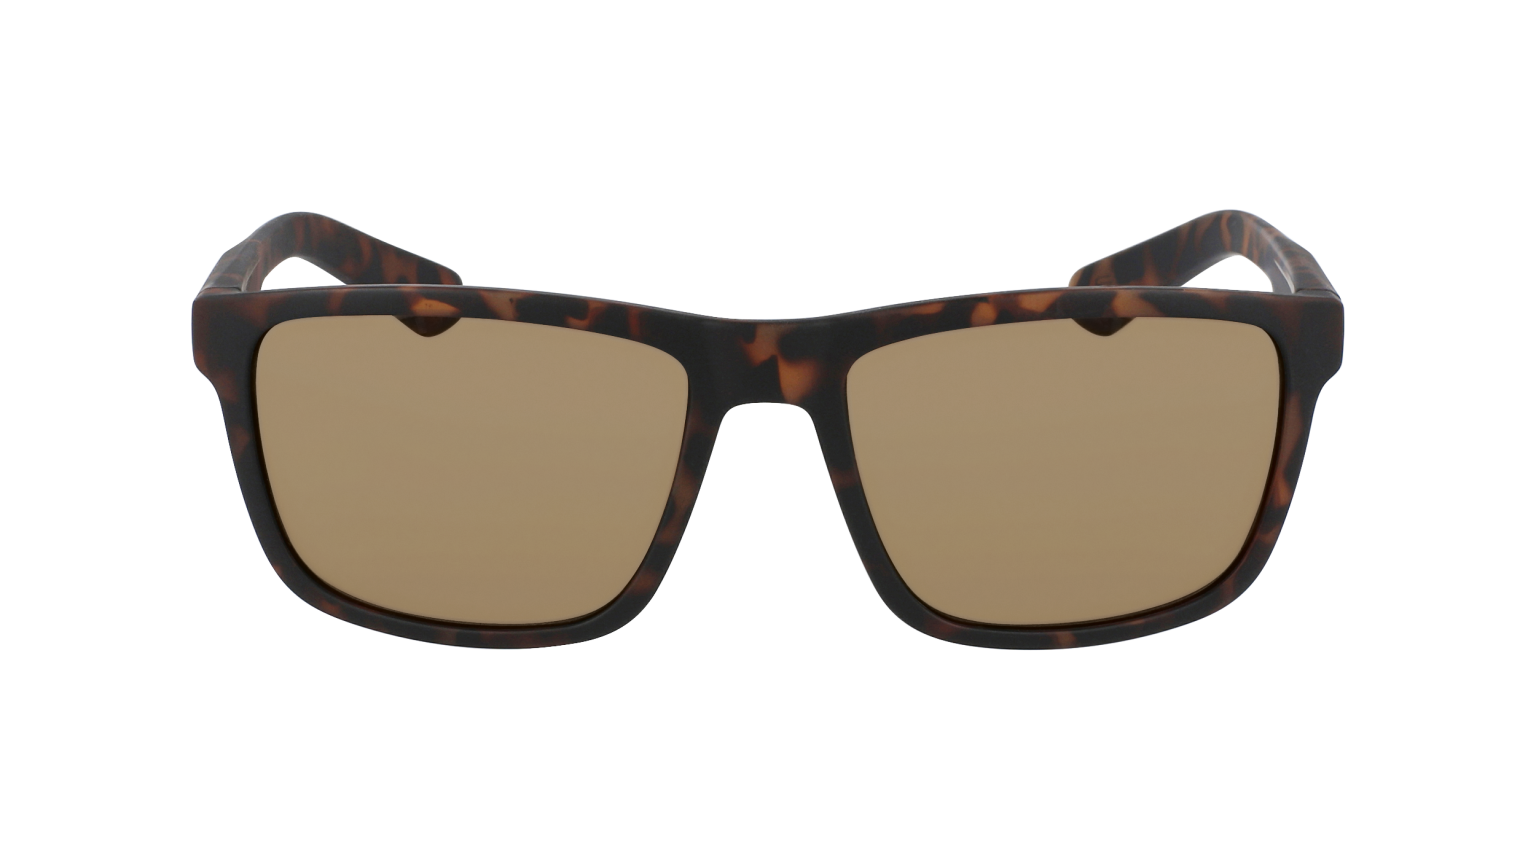 REED - Matte Tortoise with Lumalens Brown Lens